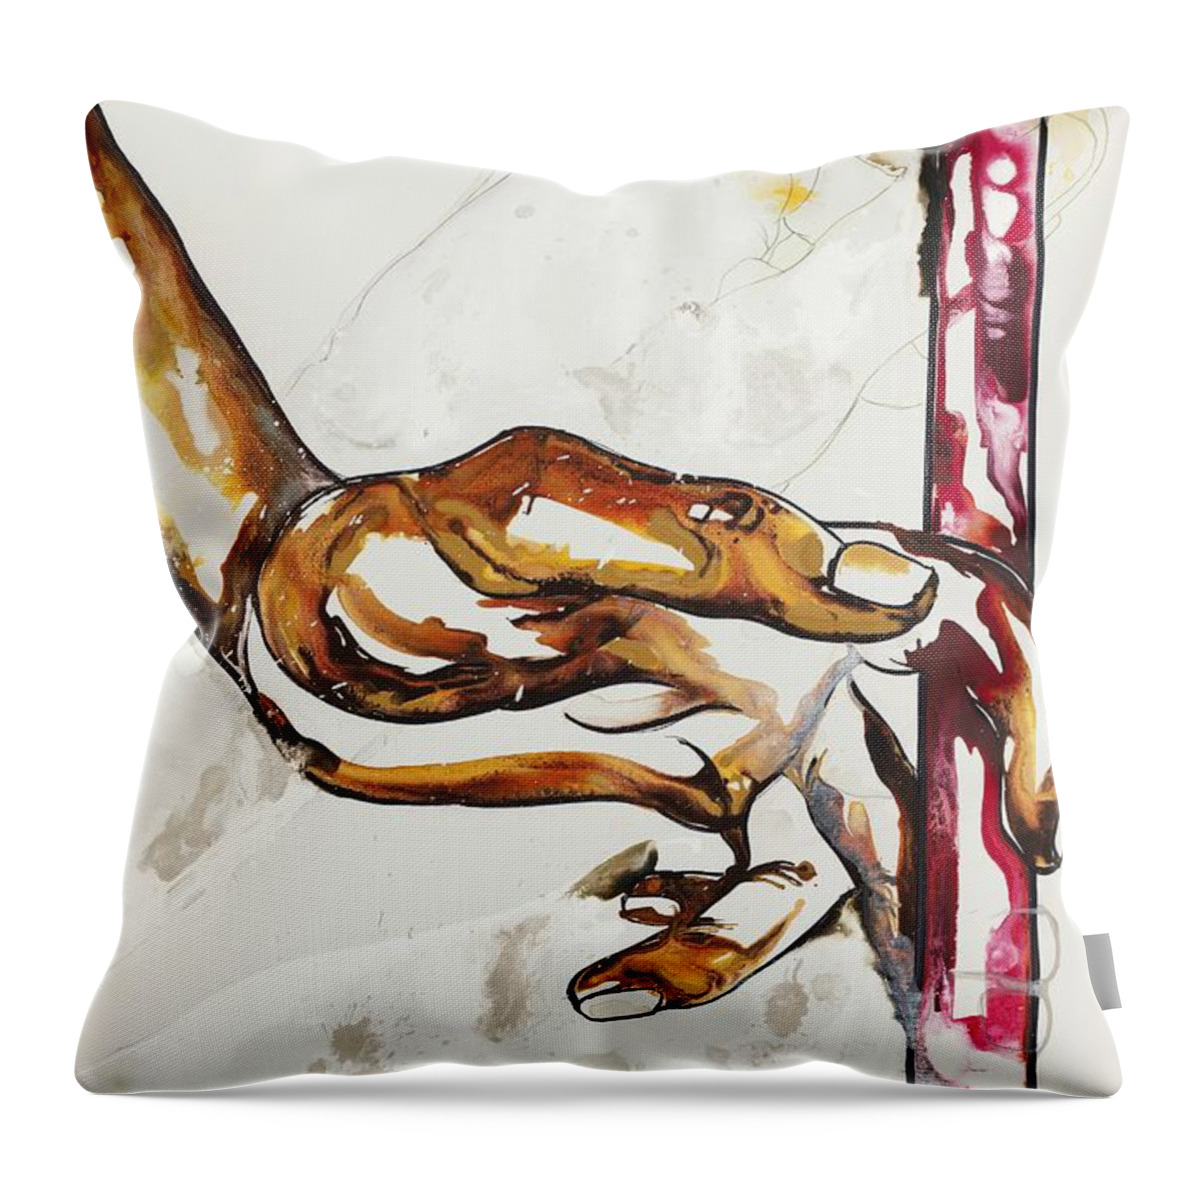 Hand Throw Pillow featuring the painting Barely Holding On by Kasha Ritter